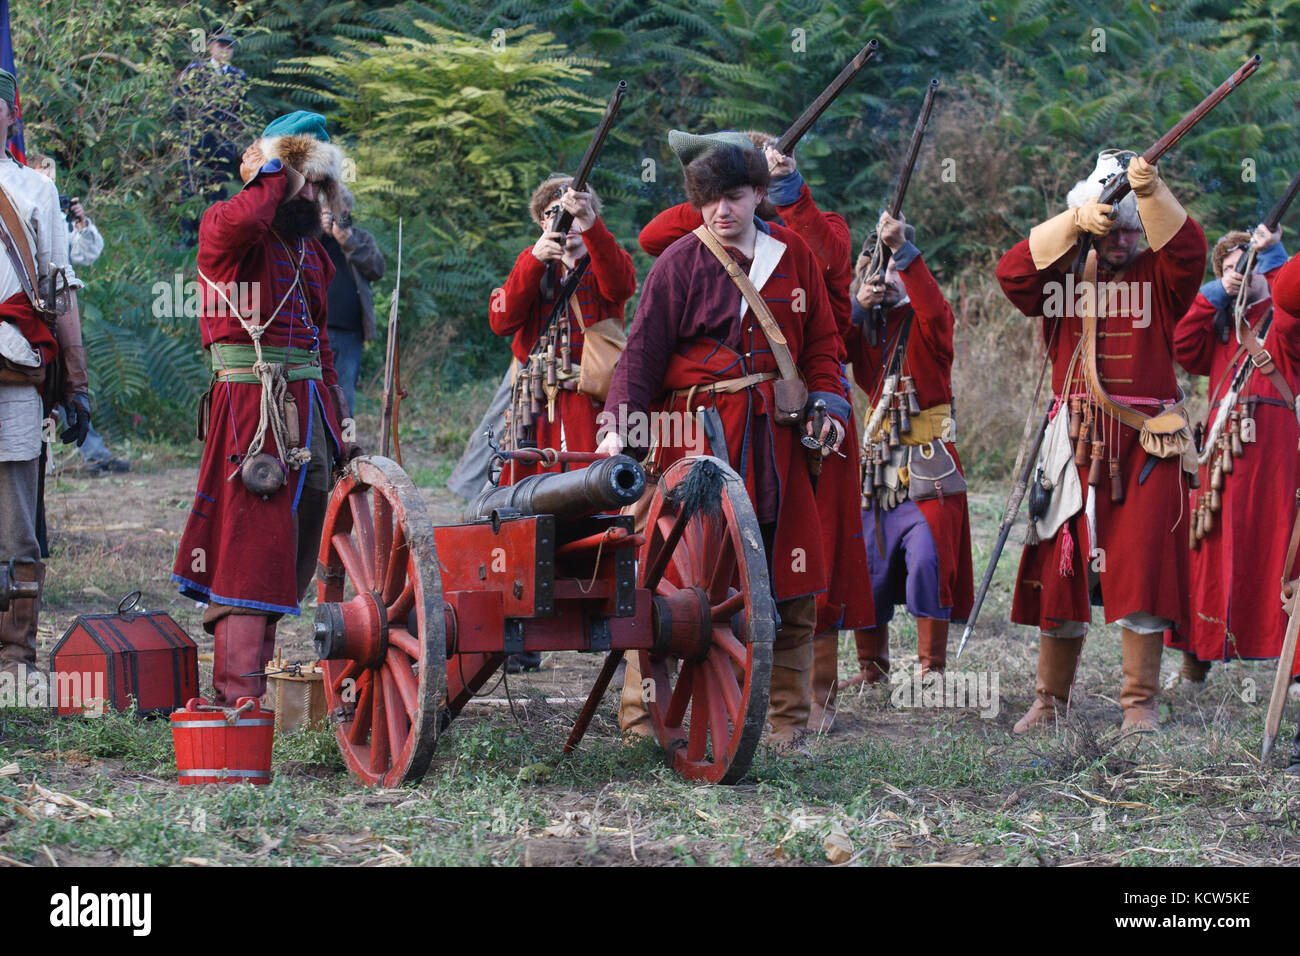 KAMYANETS-PODILSKY, UKRAINE - OCTOBER 3, 2009: Members of history club wear historical uniform 17 century during historical reenactment. Grand Duchy o Stock Photo